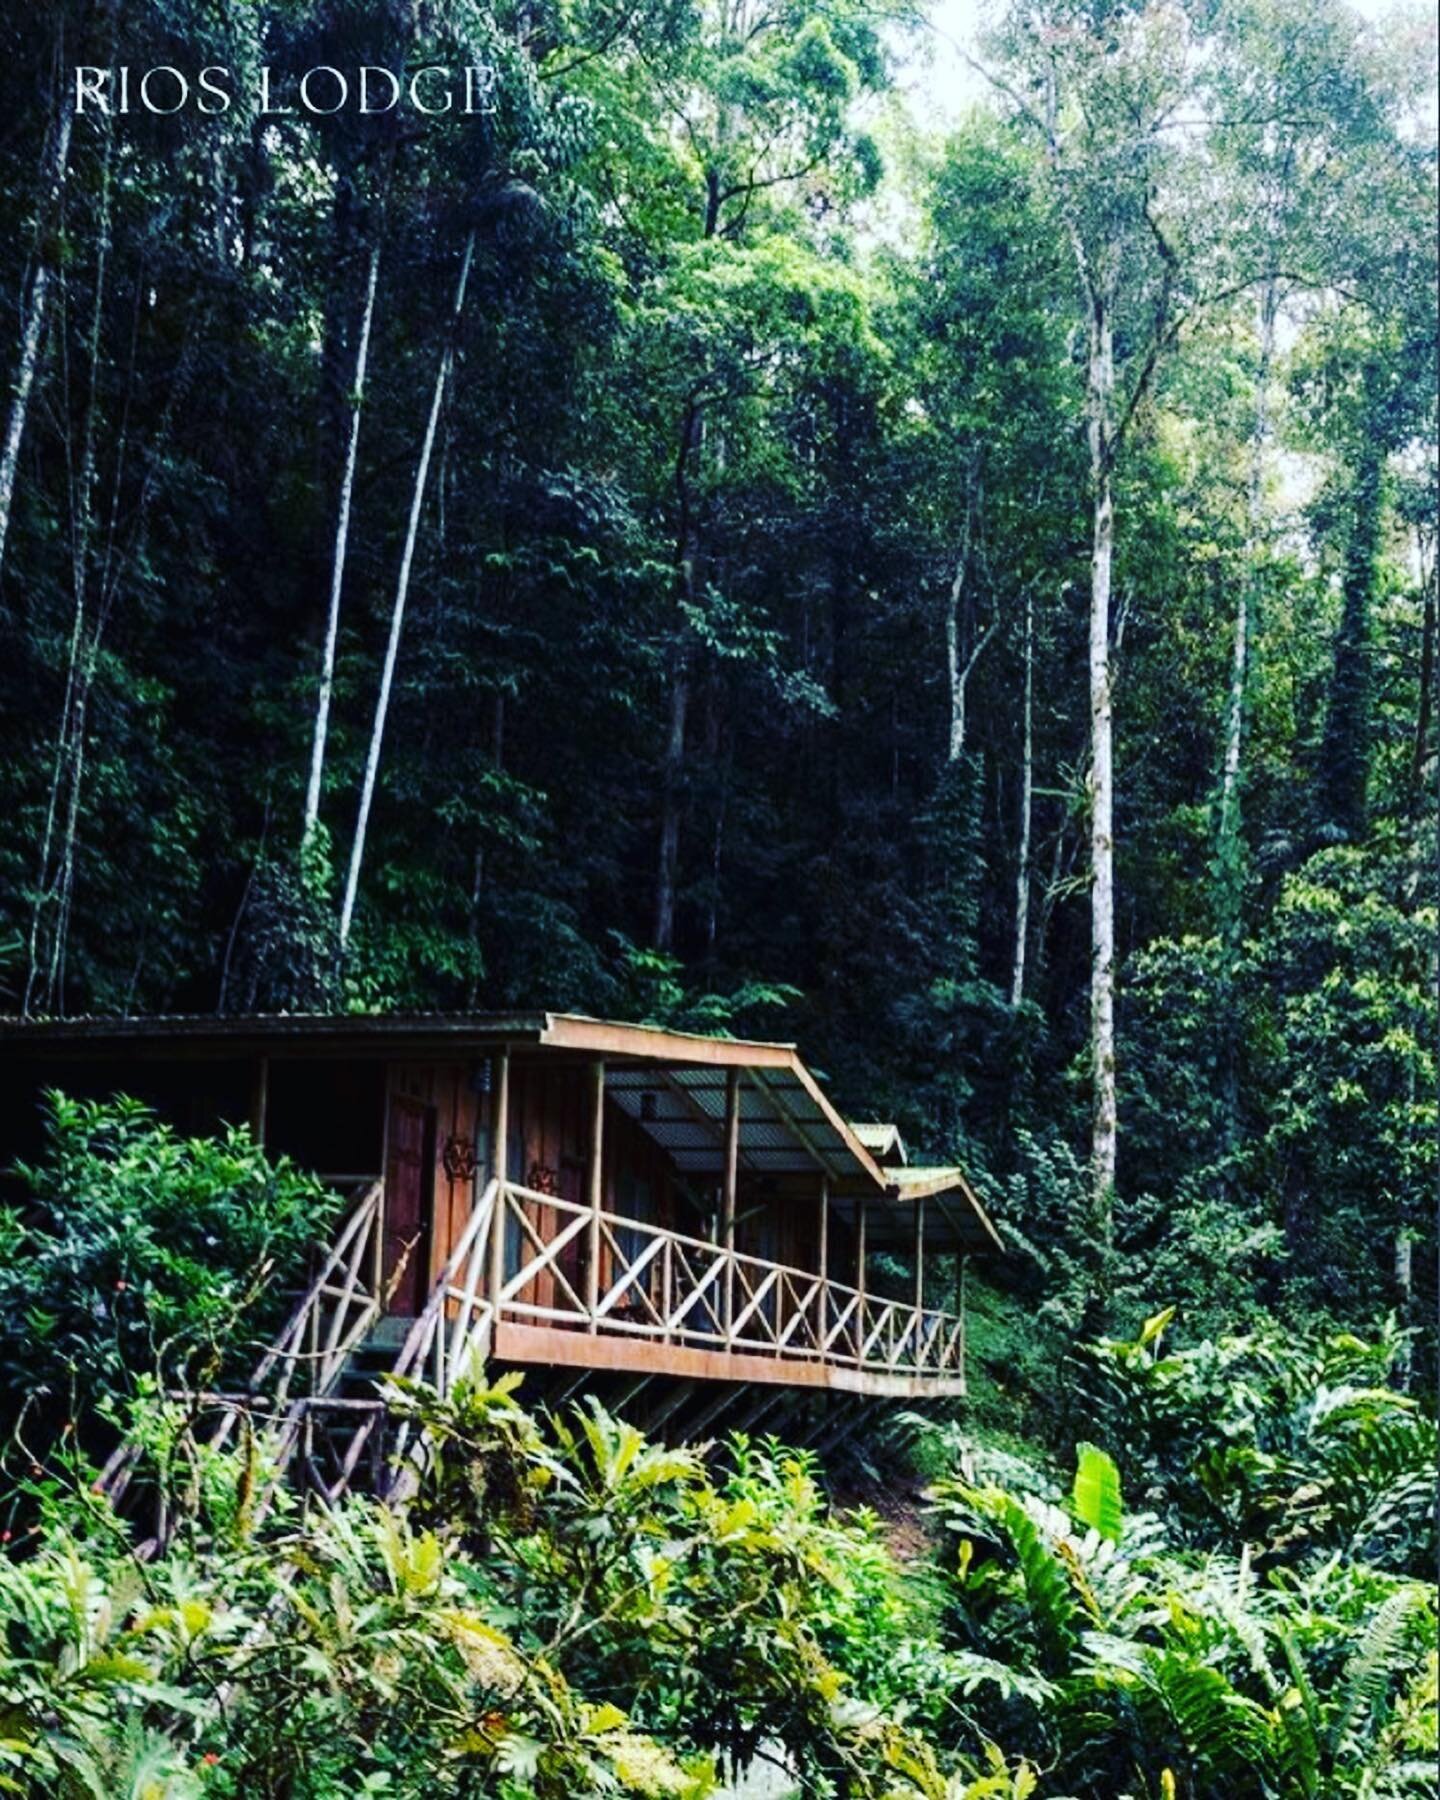 Yes, it&rsquo;s isolated which is all part of Rios Lodge&rsquo;s endearing charm. The pure thrill of staying at a remote off-the-grid lodge in the deep rainforest, on the banks of the mighty Pacuare River is utter bliss. The constant roar of the rive